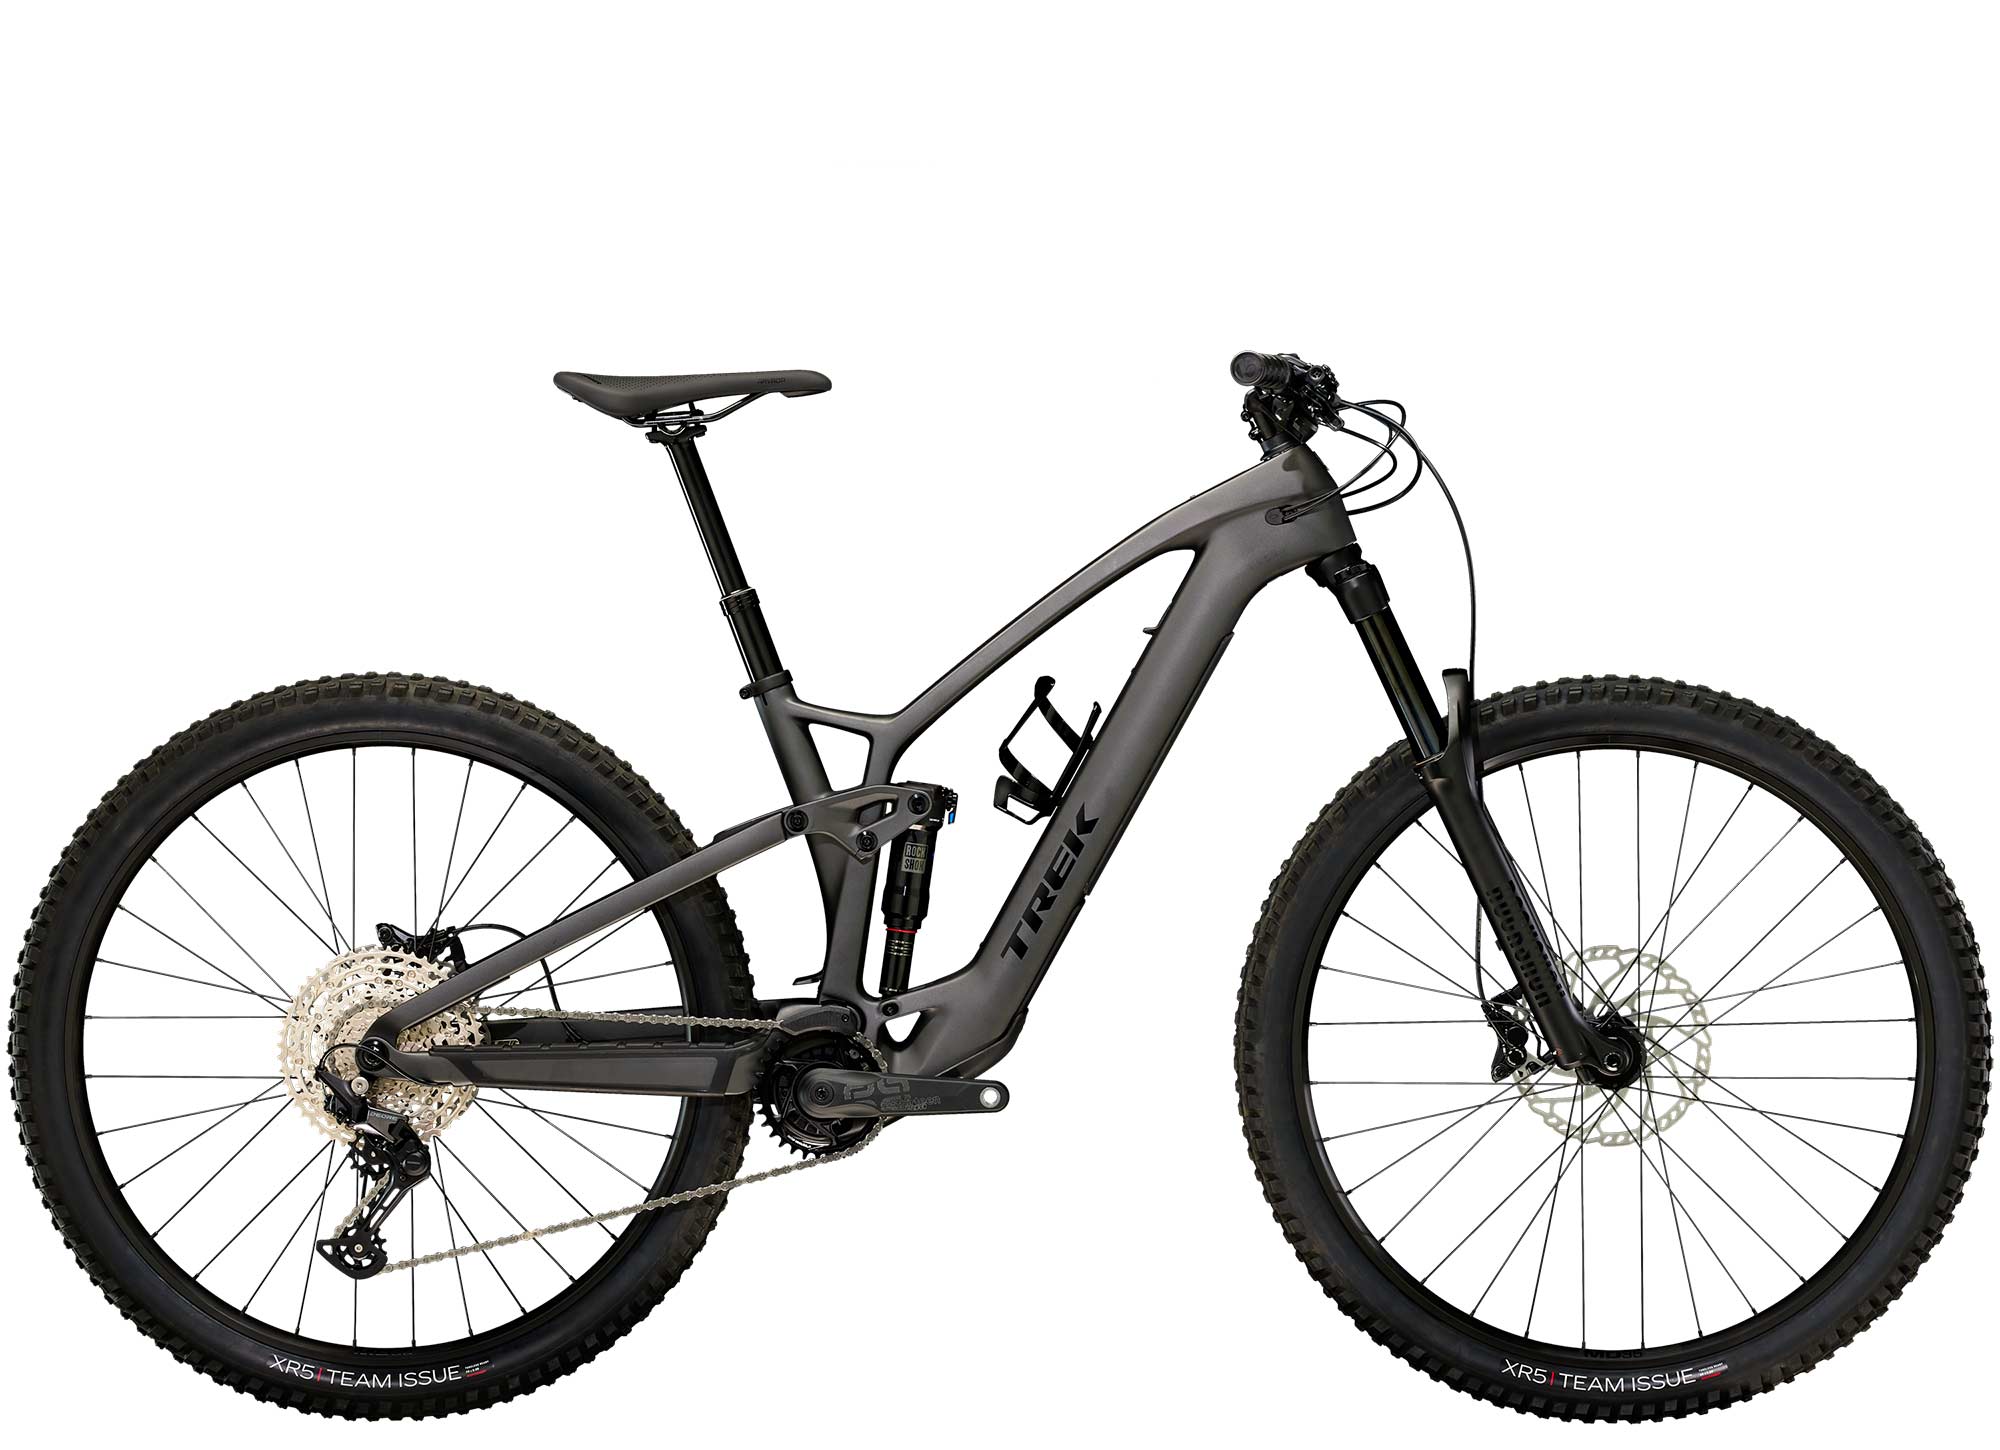 The line starts at $6,500 for the Fuel EXe 9.5, with RockShox 35 Gold RL fork, RockShox Deluxe Select+ RT rear shock, and Shimano Deore 12-speed drivetrain.